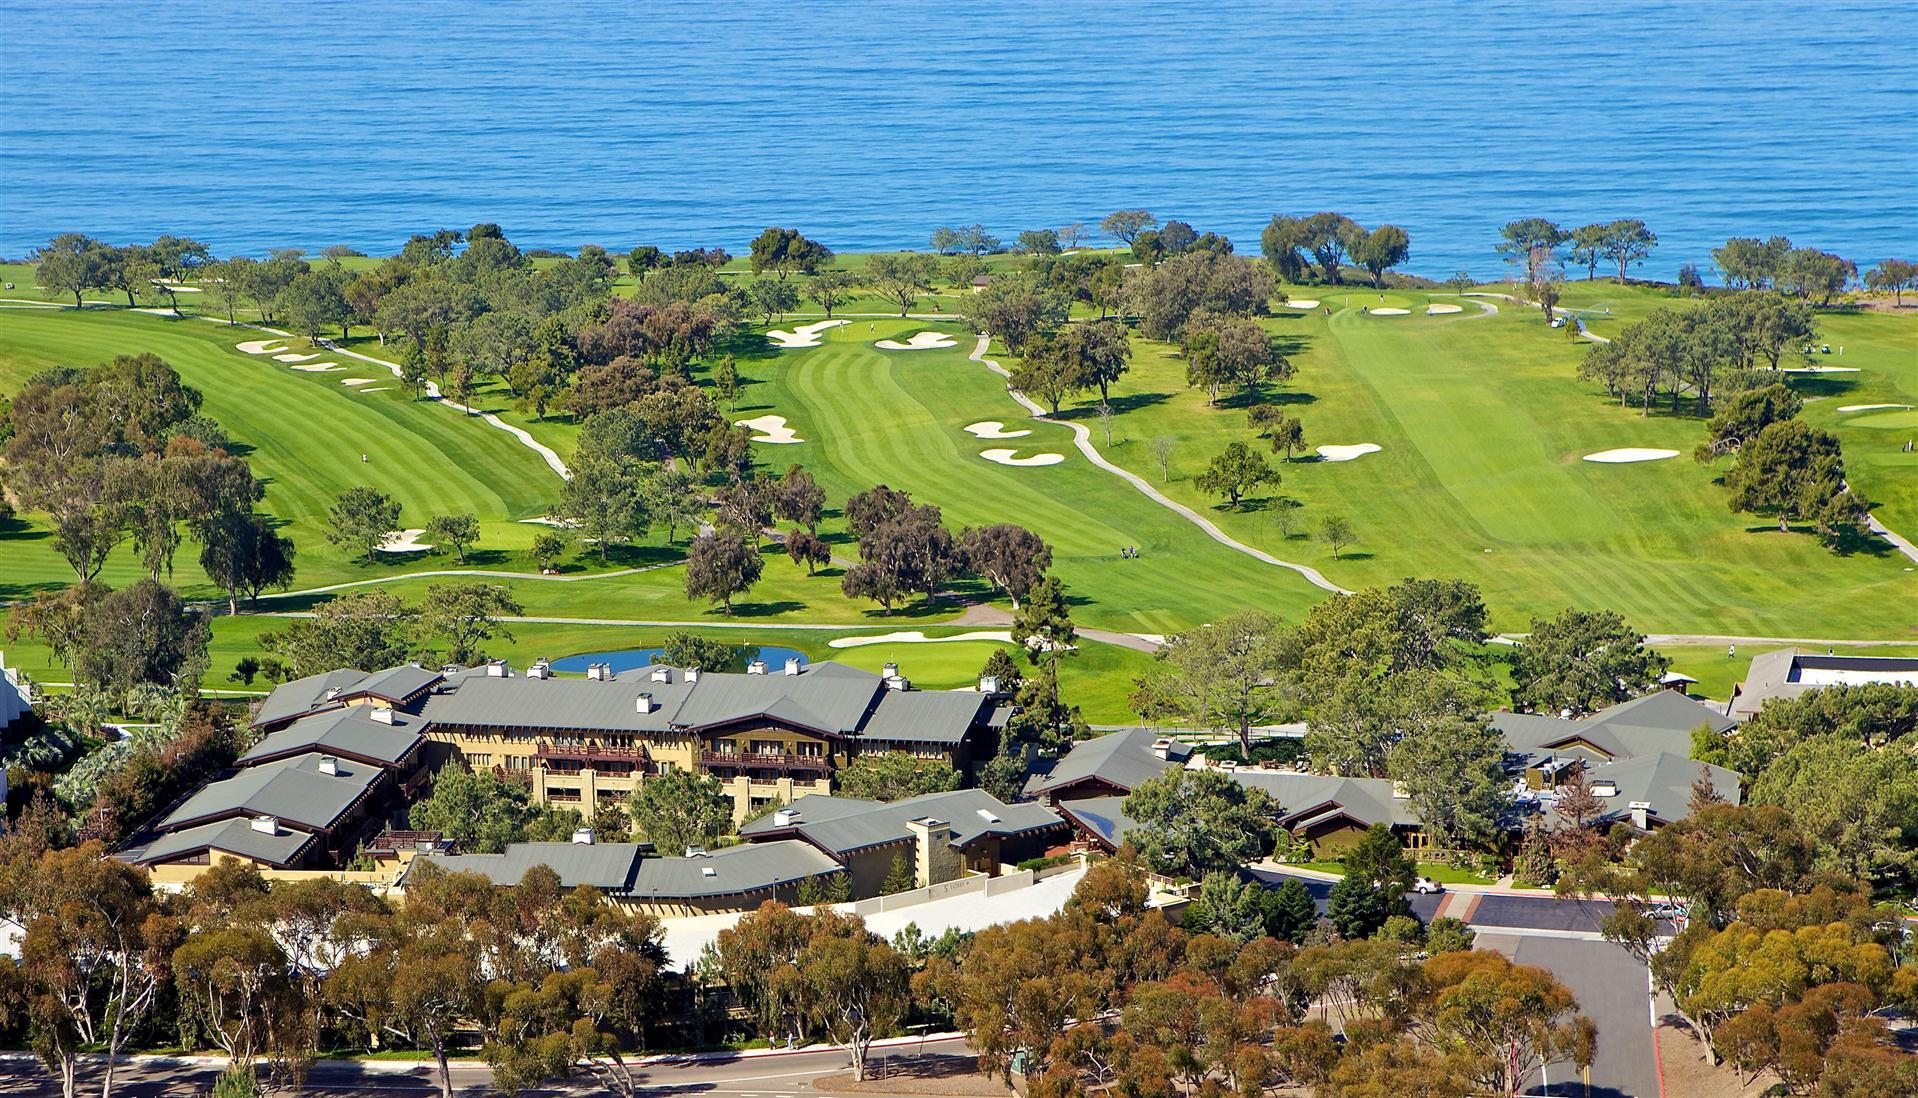 The Lodge at Torrey Pines in San Diego, CA